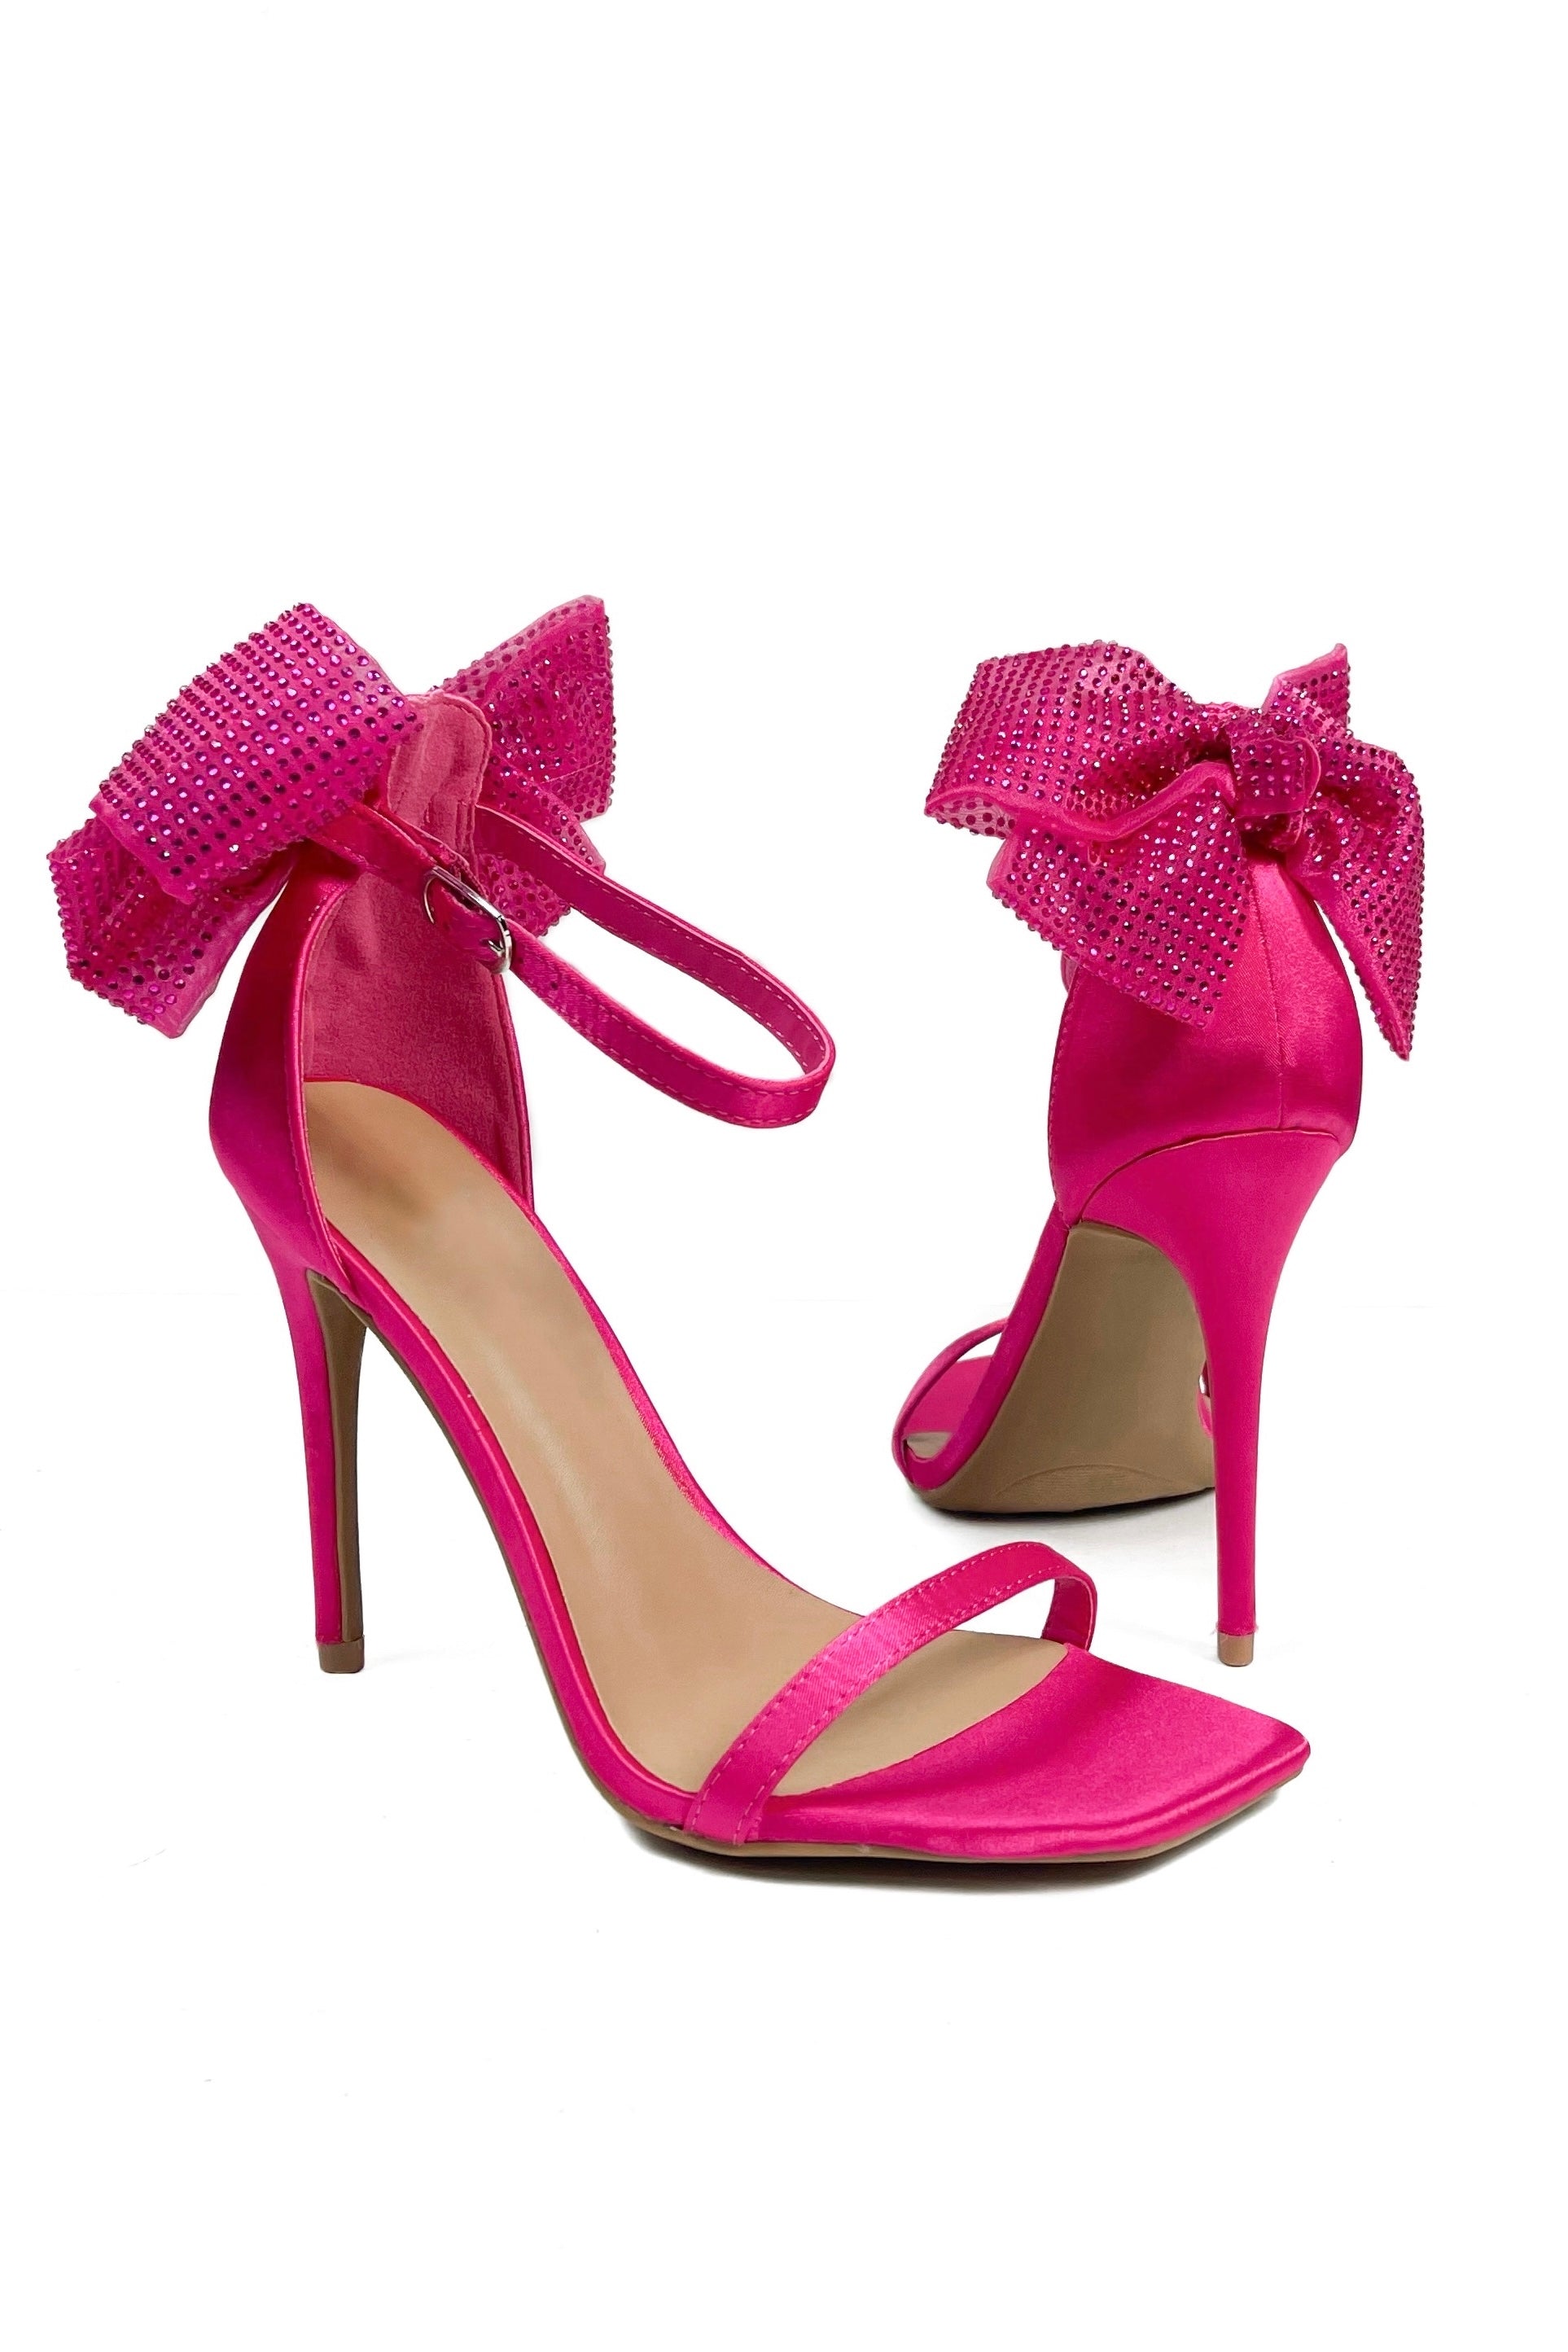 Buy Hot Pink High Heels Online In India - Etsy India